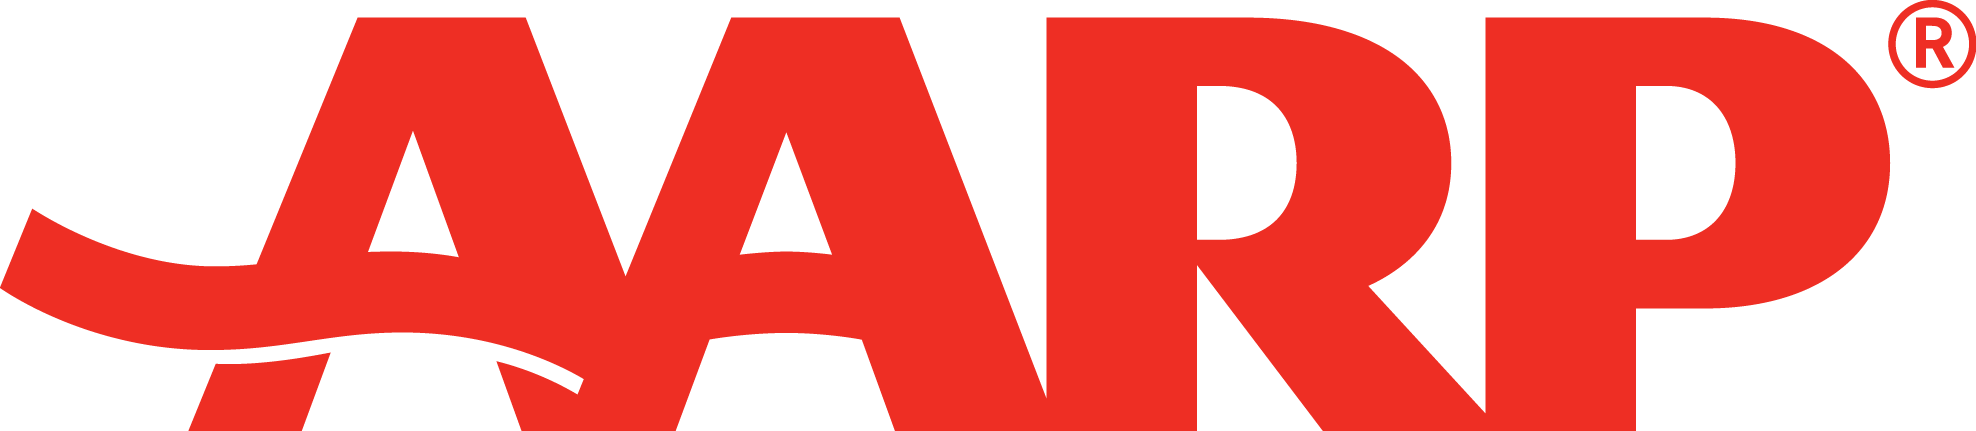 AARP Red.png, Aarp Logo PNG - Free PNG